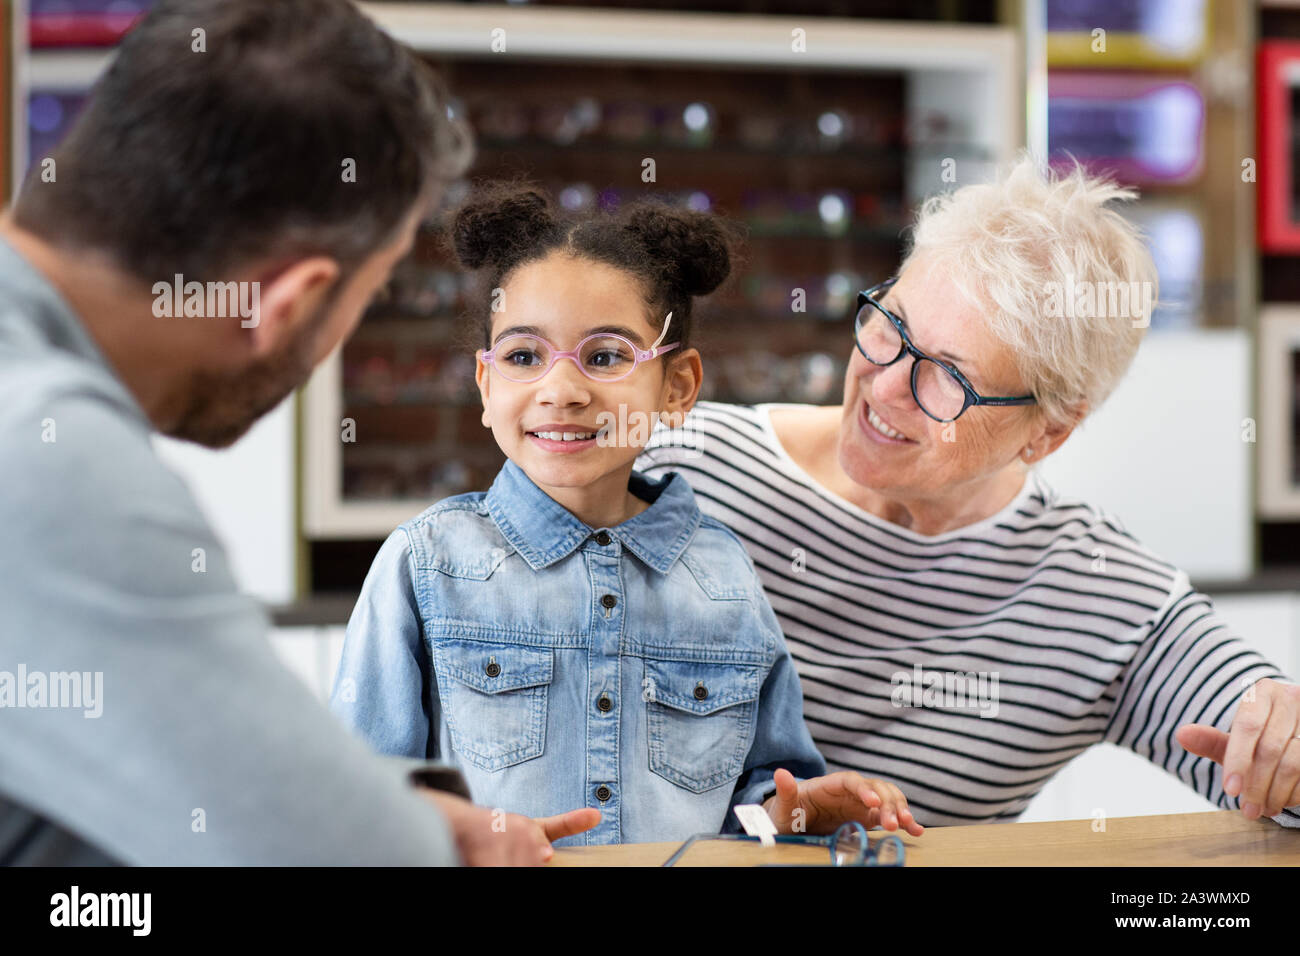 Young girl choosing glasses at the optician Stock Photo